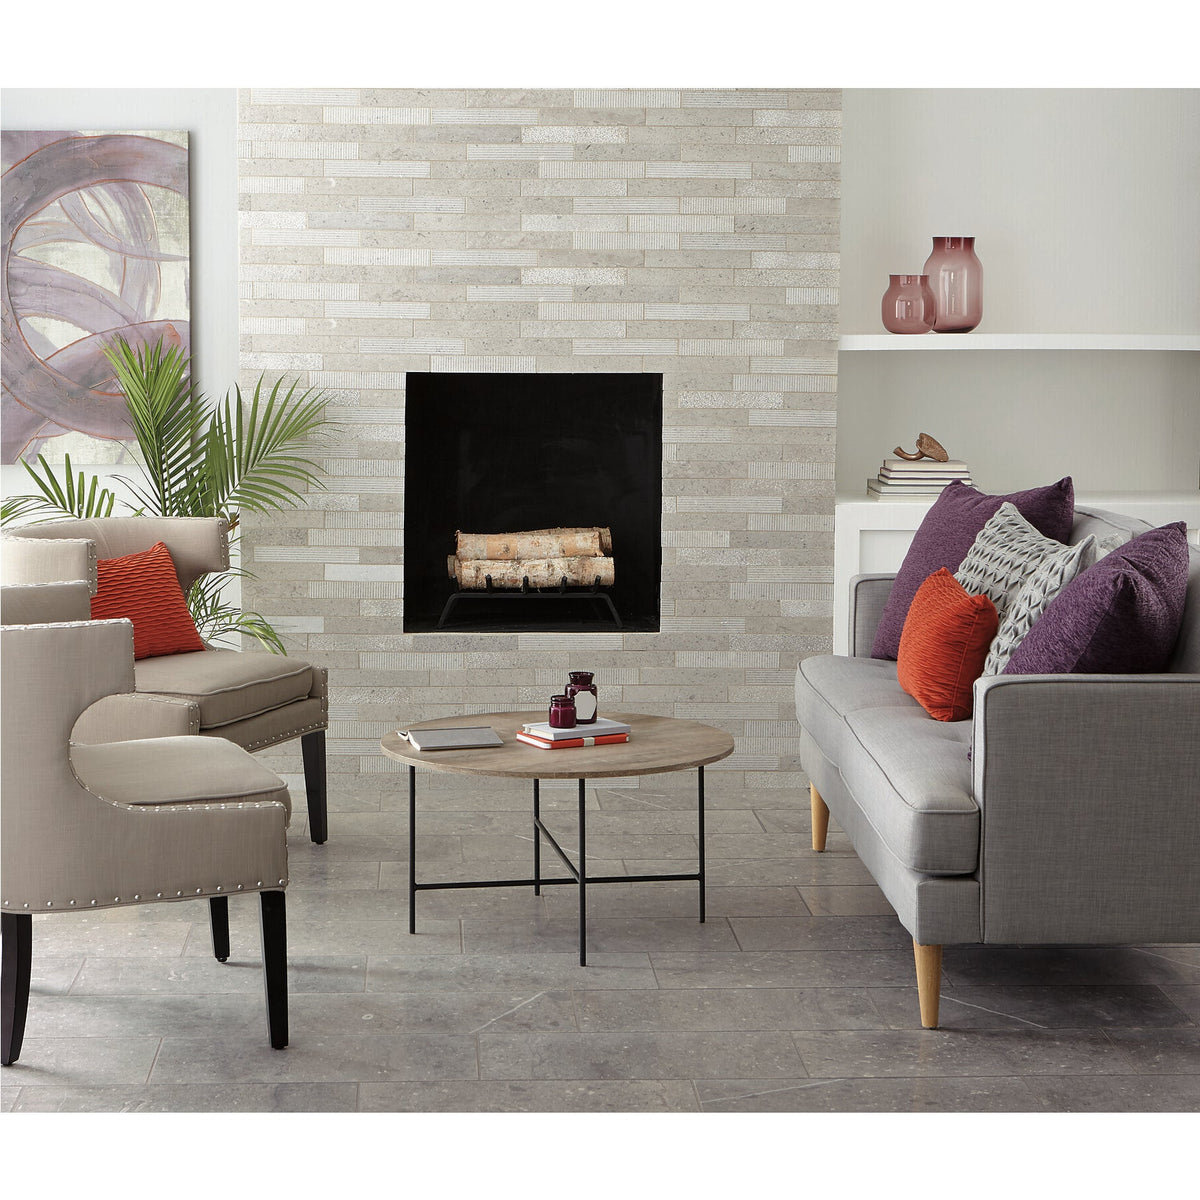 Daltile - Center City - 6 in. x 24 in. Linear Mosaic - Delancey Grey Fireplace Install